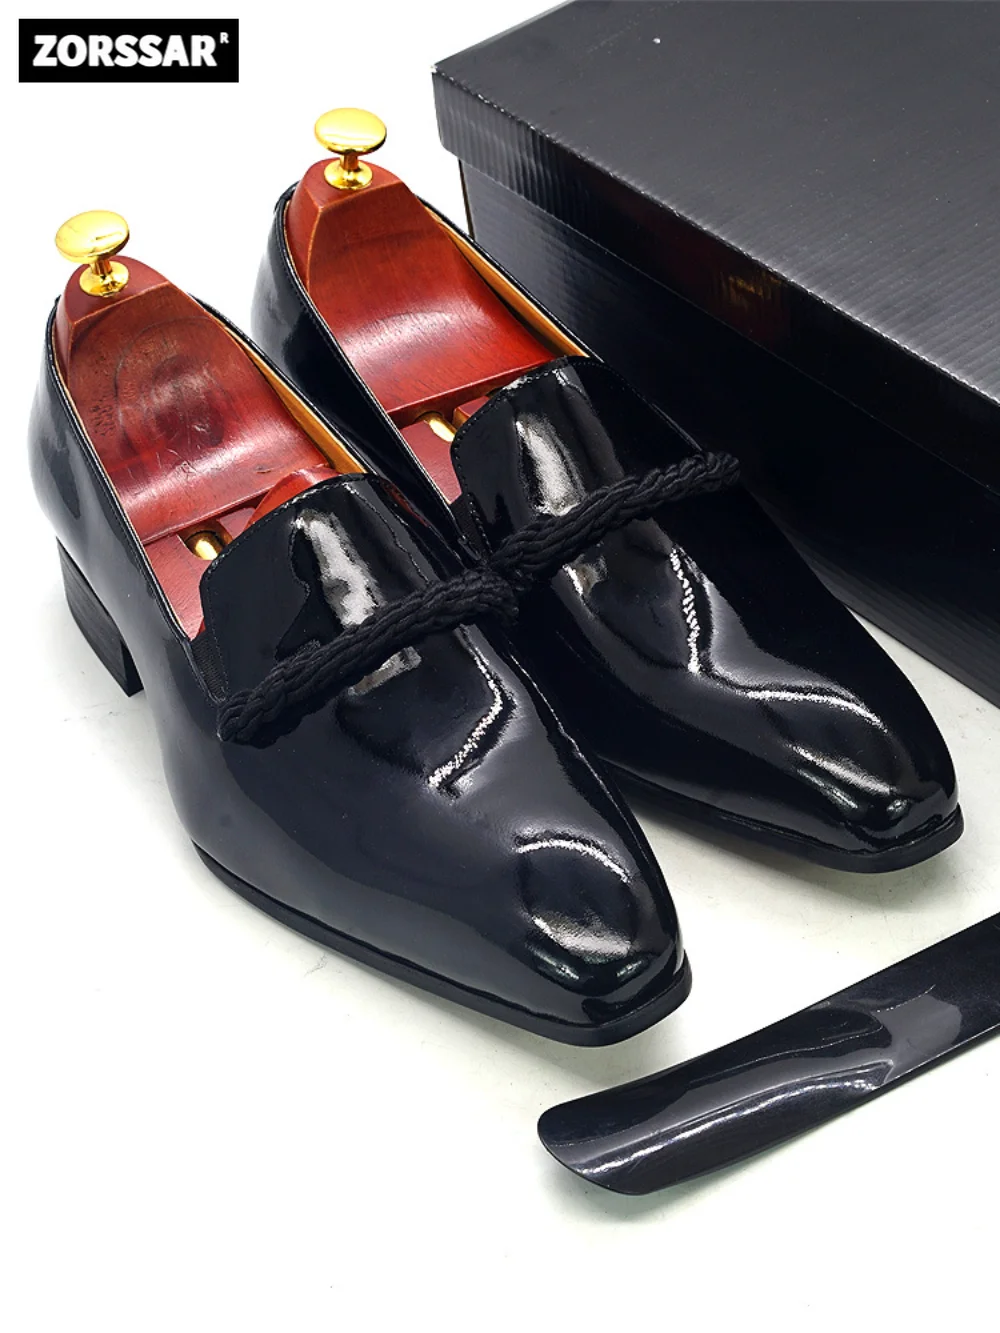 

2023 new Office Men Dress Shoes Men Formal Shoes Patent Leather Luxury Fashion Groom Wedding Shoes Men loafers Shoes Dress 39-46